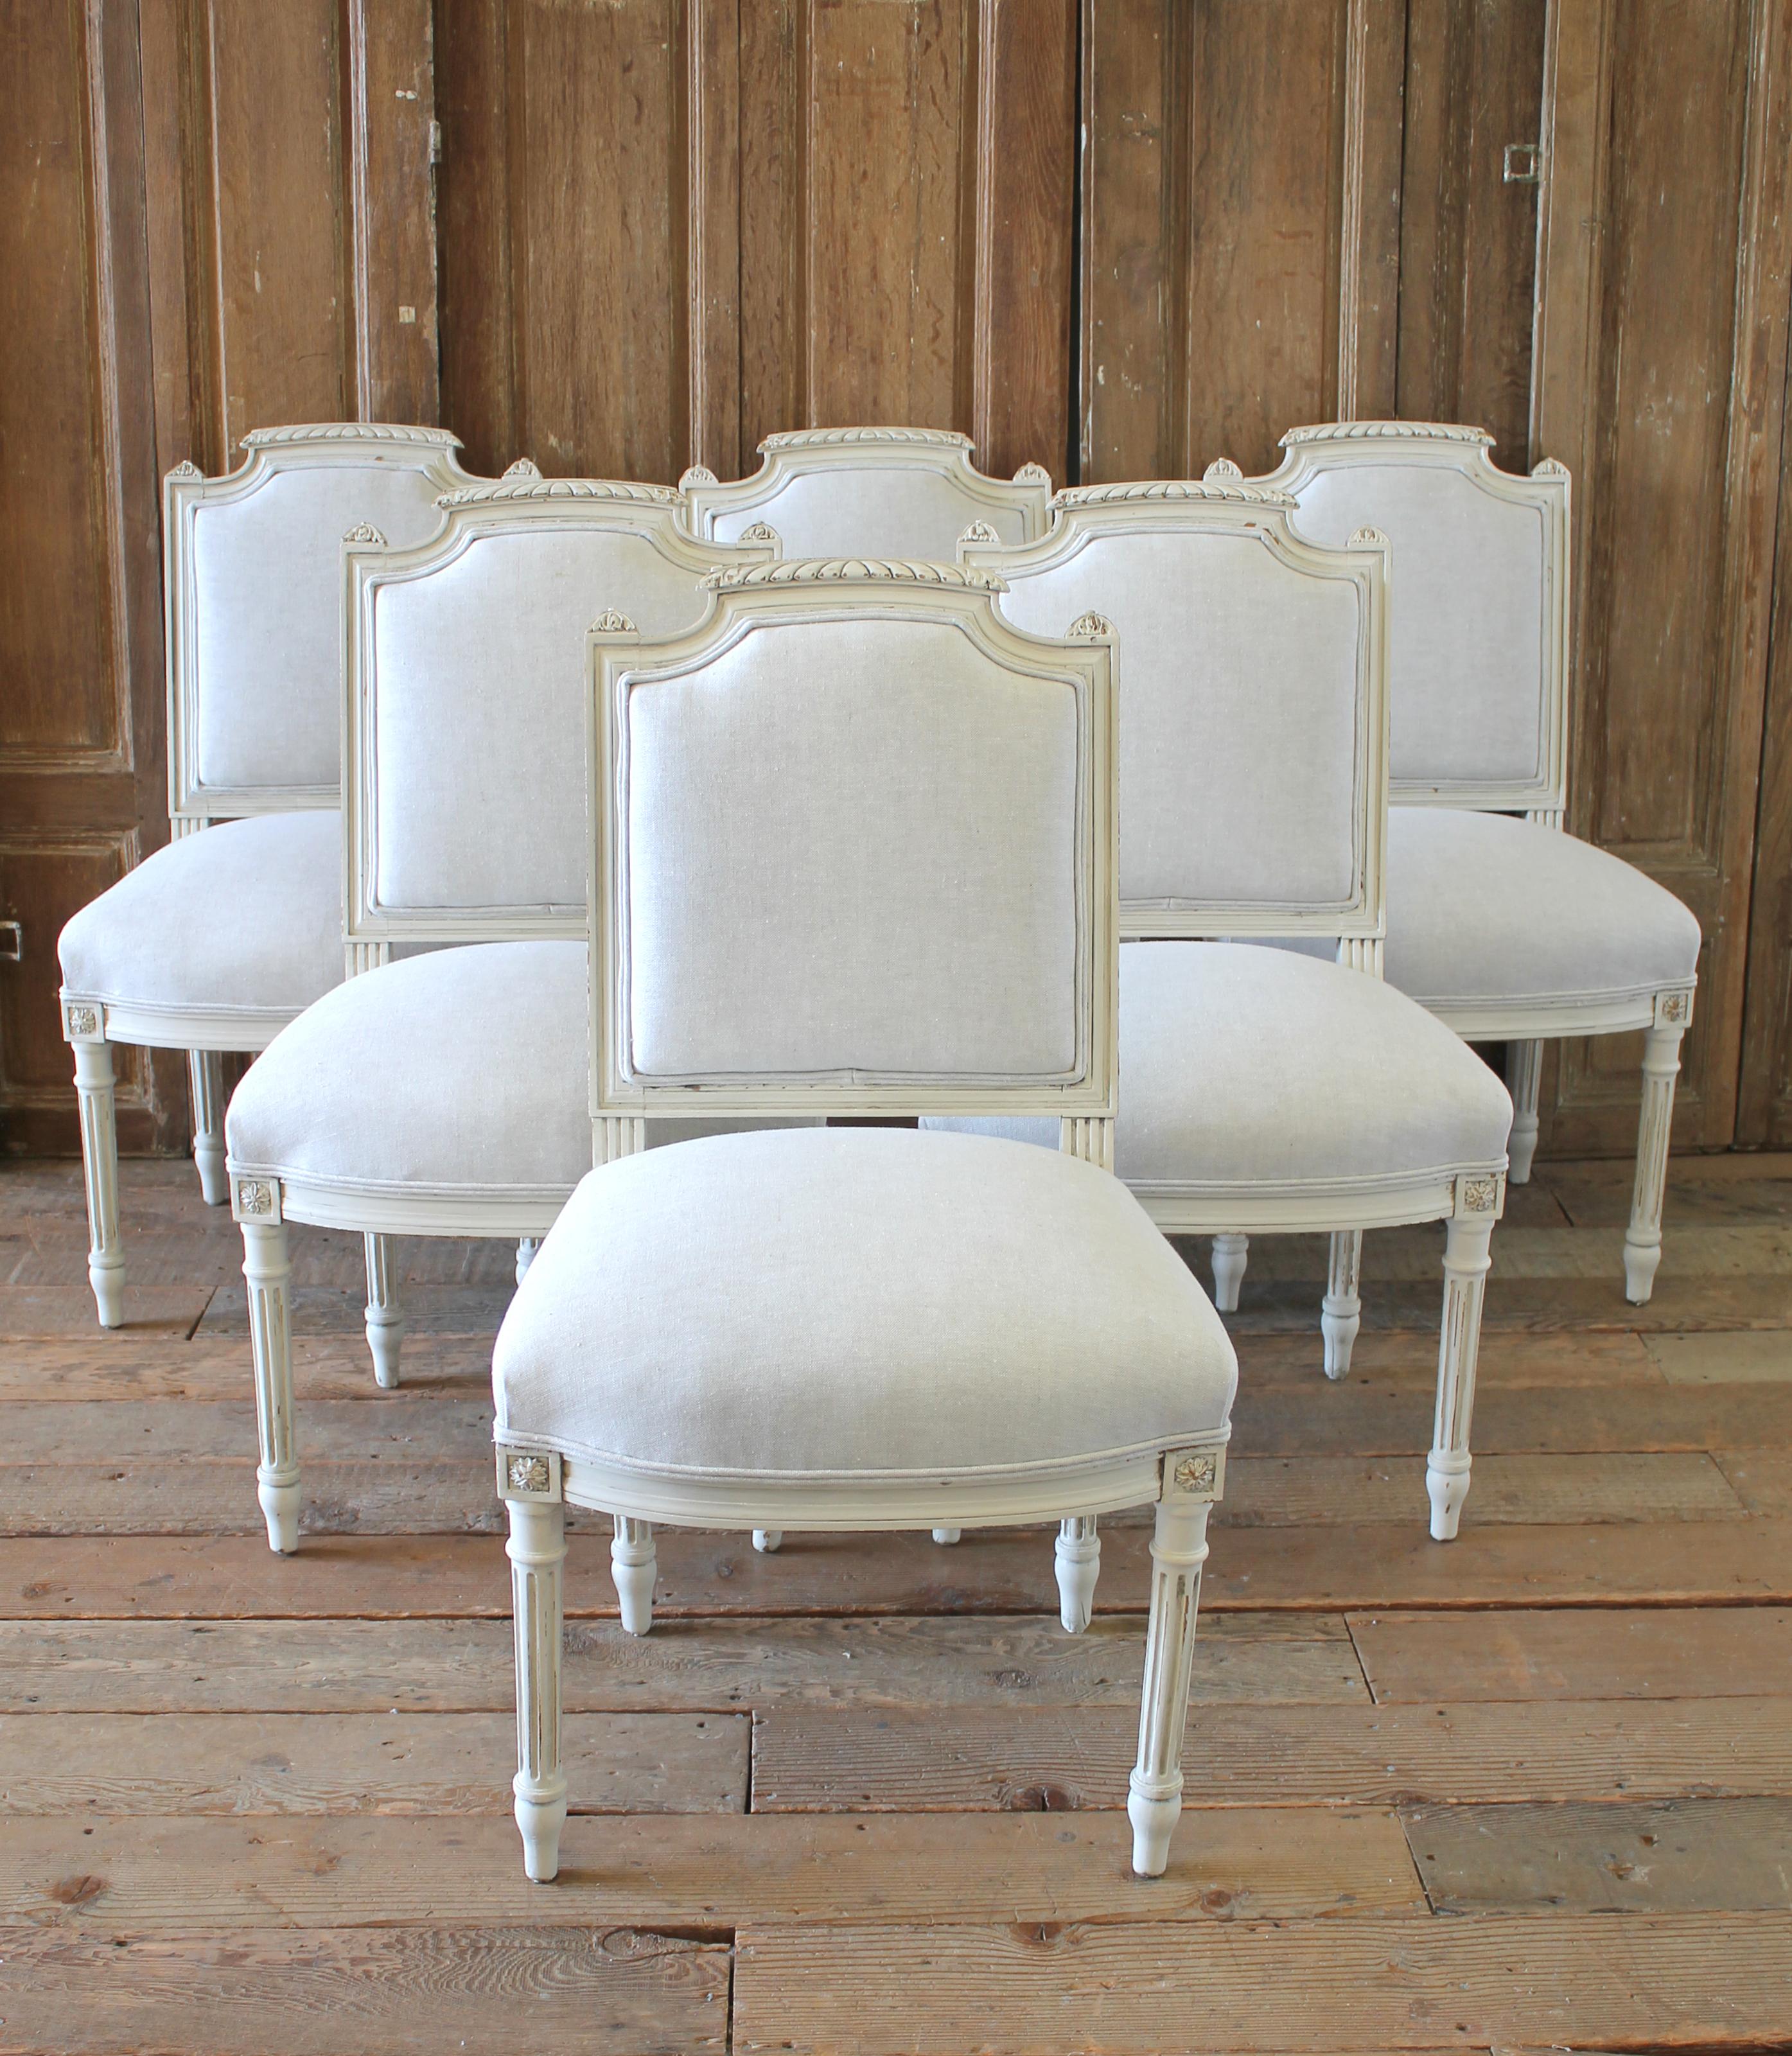 Set of 6 painted and upholstered Louis XVI style dining room chairs.
Painted in our soft oyster white, with subtle distressed edges, and finished with an antique glazed patina. This off white color blends beautifully with all shades of white. The